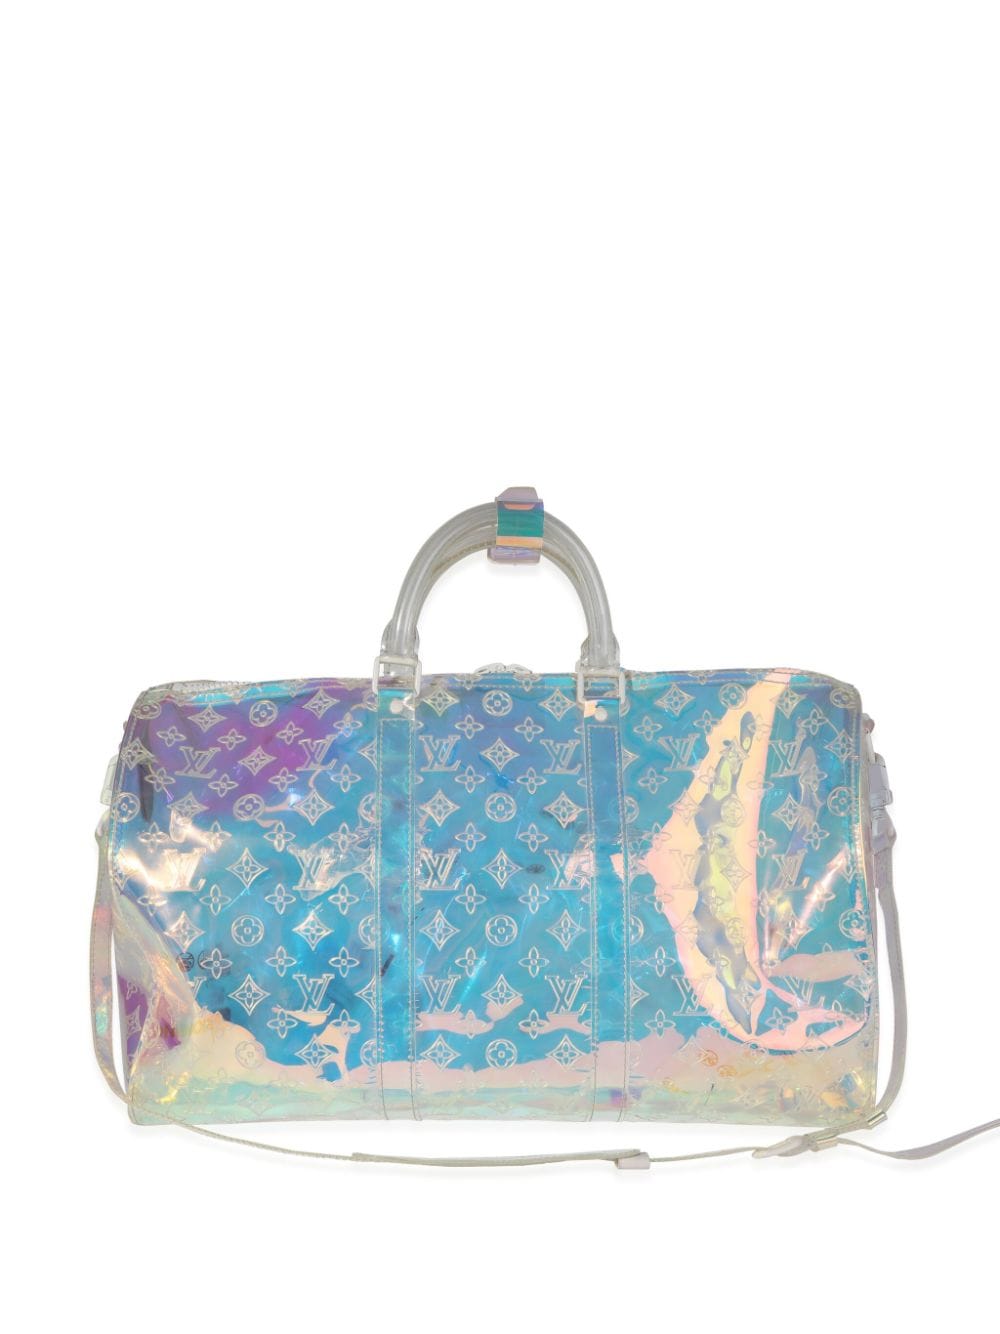 Louis Vuitton 2018 pre-owned Iridescent Keepall Bandouliere 50 Travel Bag -  Farfetch